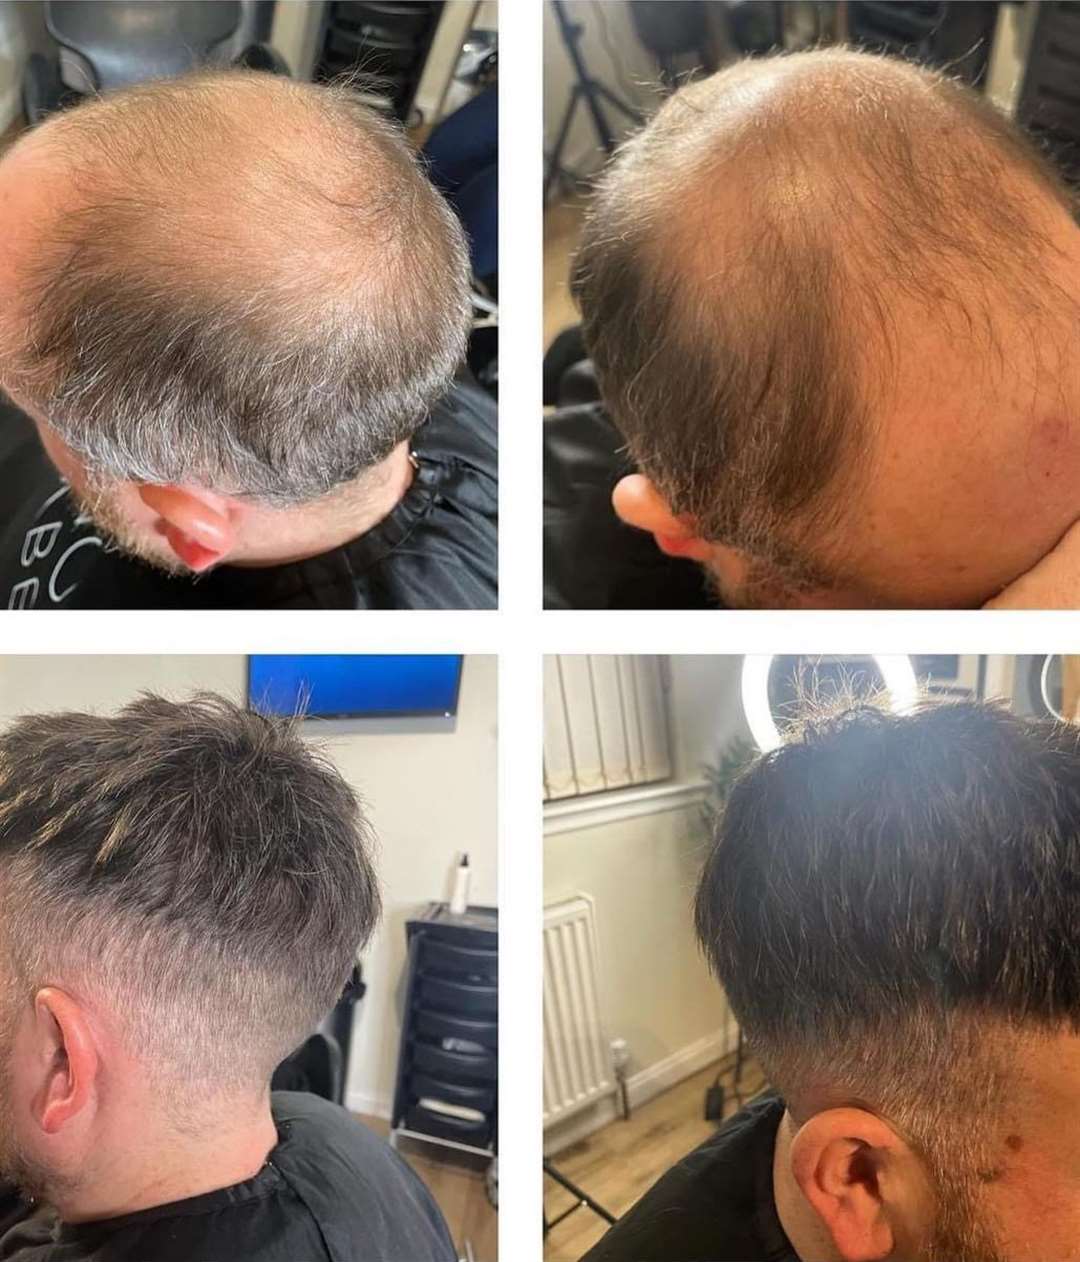 Sarah Murray has worked with many men who have been dealing with hair loss.